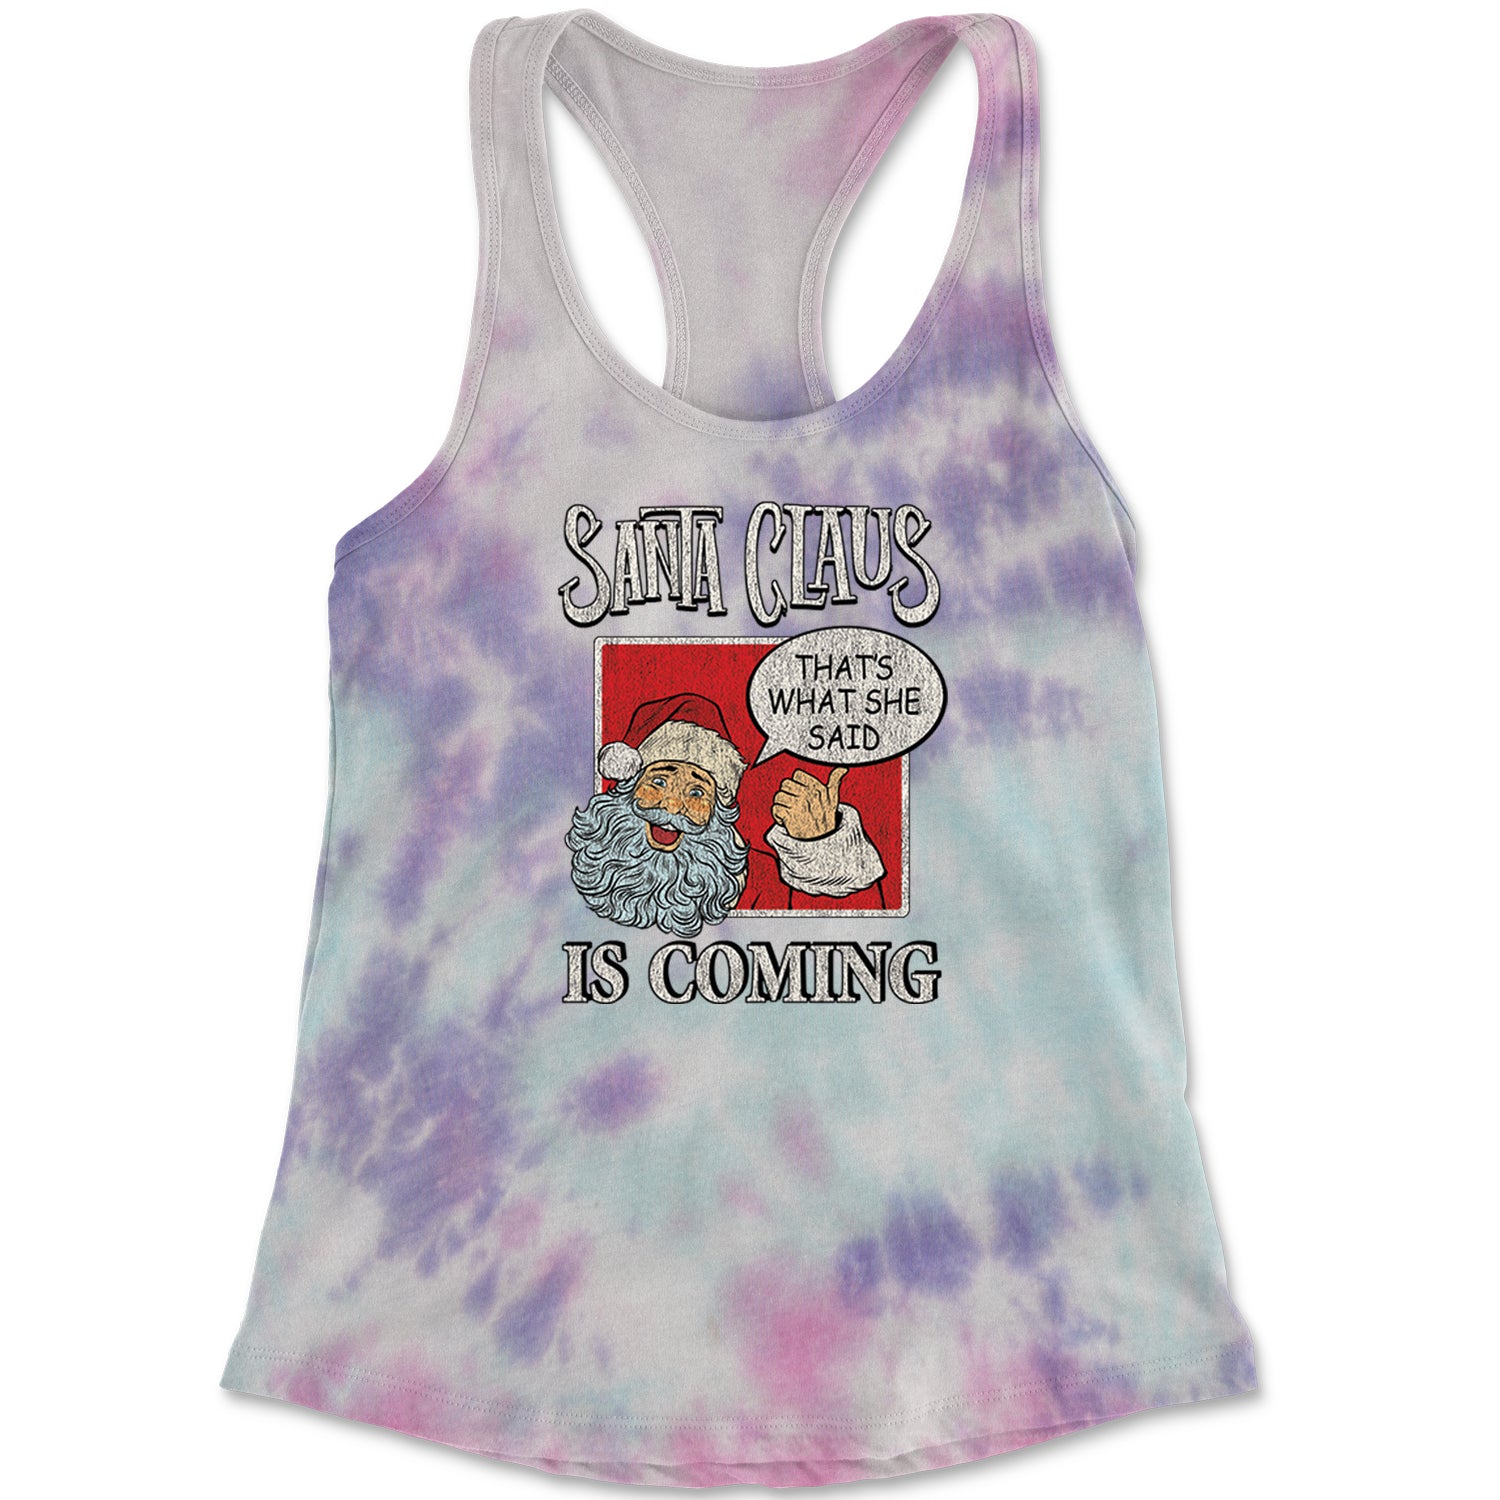 Santa Claus Is Coming - That's What She Said Racerback Tank Top for Women christmas, dunder, holiday, michael, mifflin, office, sweater, ugly, xmas by Expression Tees